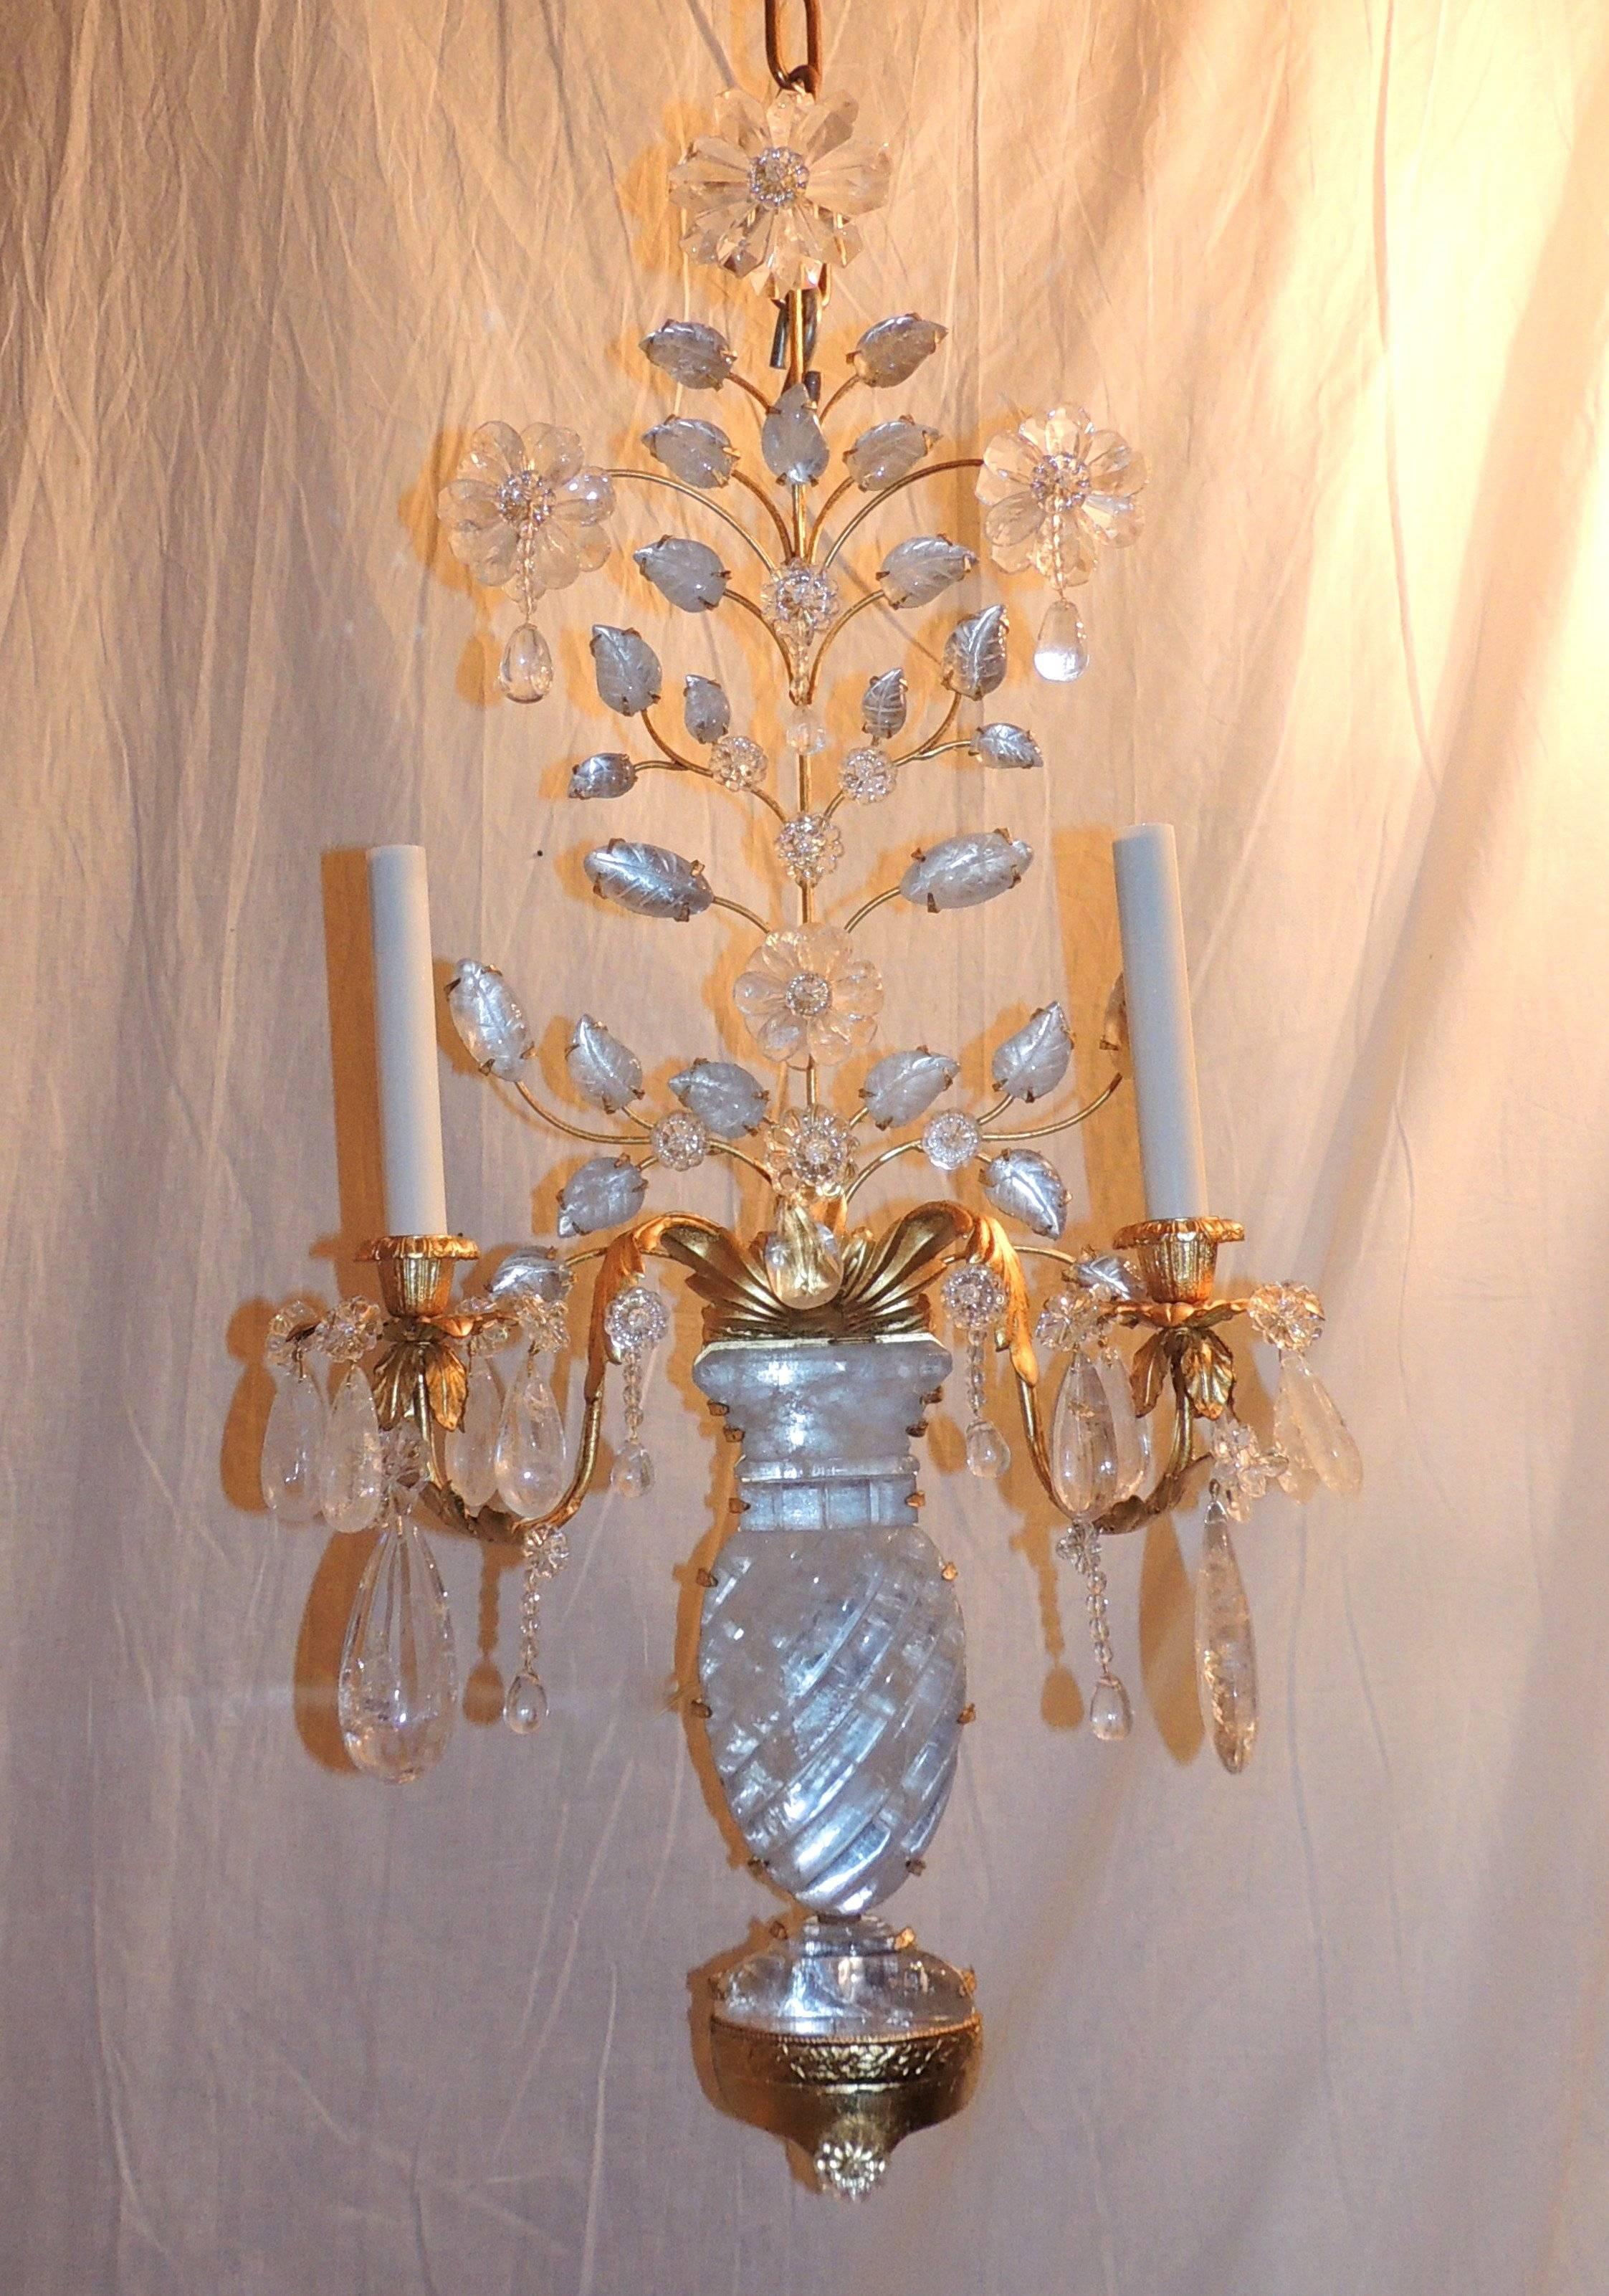 An elegant pair of gilt metal and rock crystal two-arm candelabra sconces with beautiful floral elements. The beautiful rock crystal urn detailed with swirls is surrounded by the lovely flowers and leaves that curve across the top of the